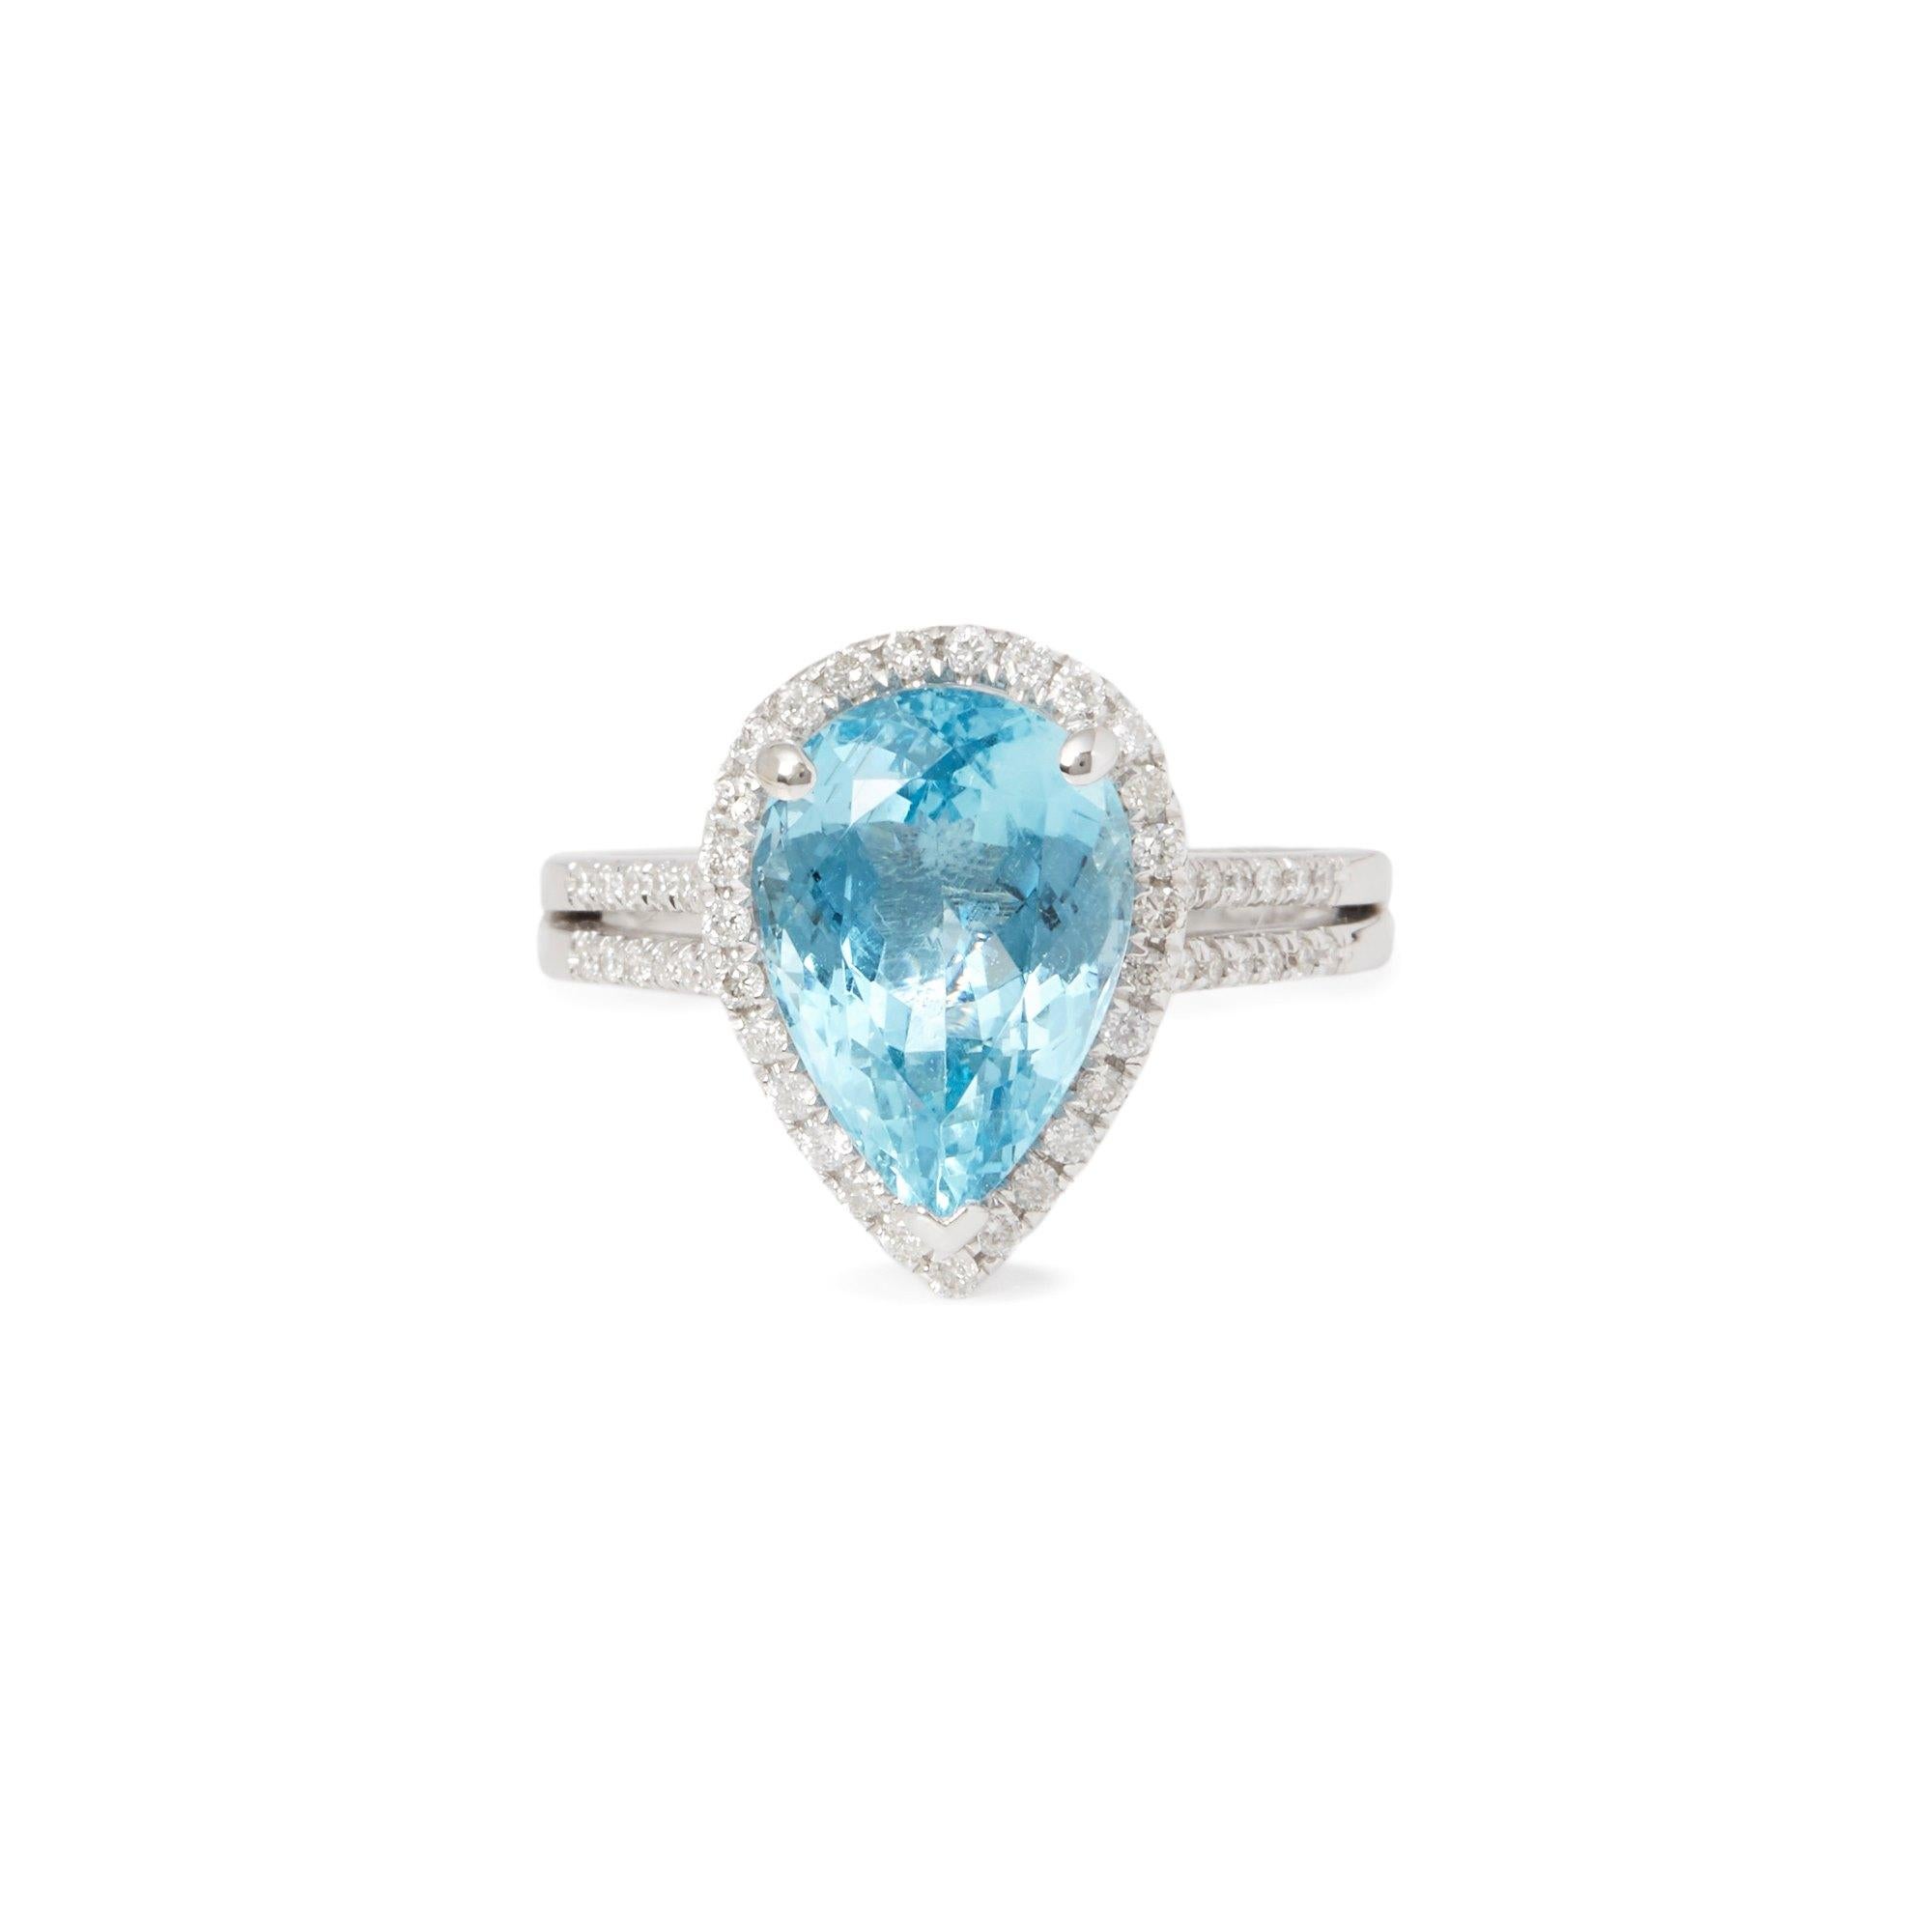 This ring designed by David Jerome is from his private collection and features one pear cut Aquamarine totalling 3.95cts sourced in Brazil. Set with round brilliant cut Diamonds totalling 0.38cts mounted in an 18k white gold setting. Finger size UK